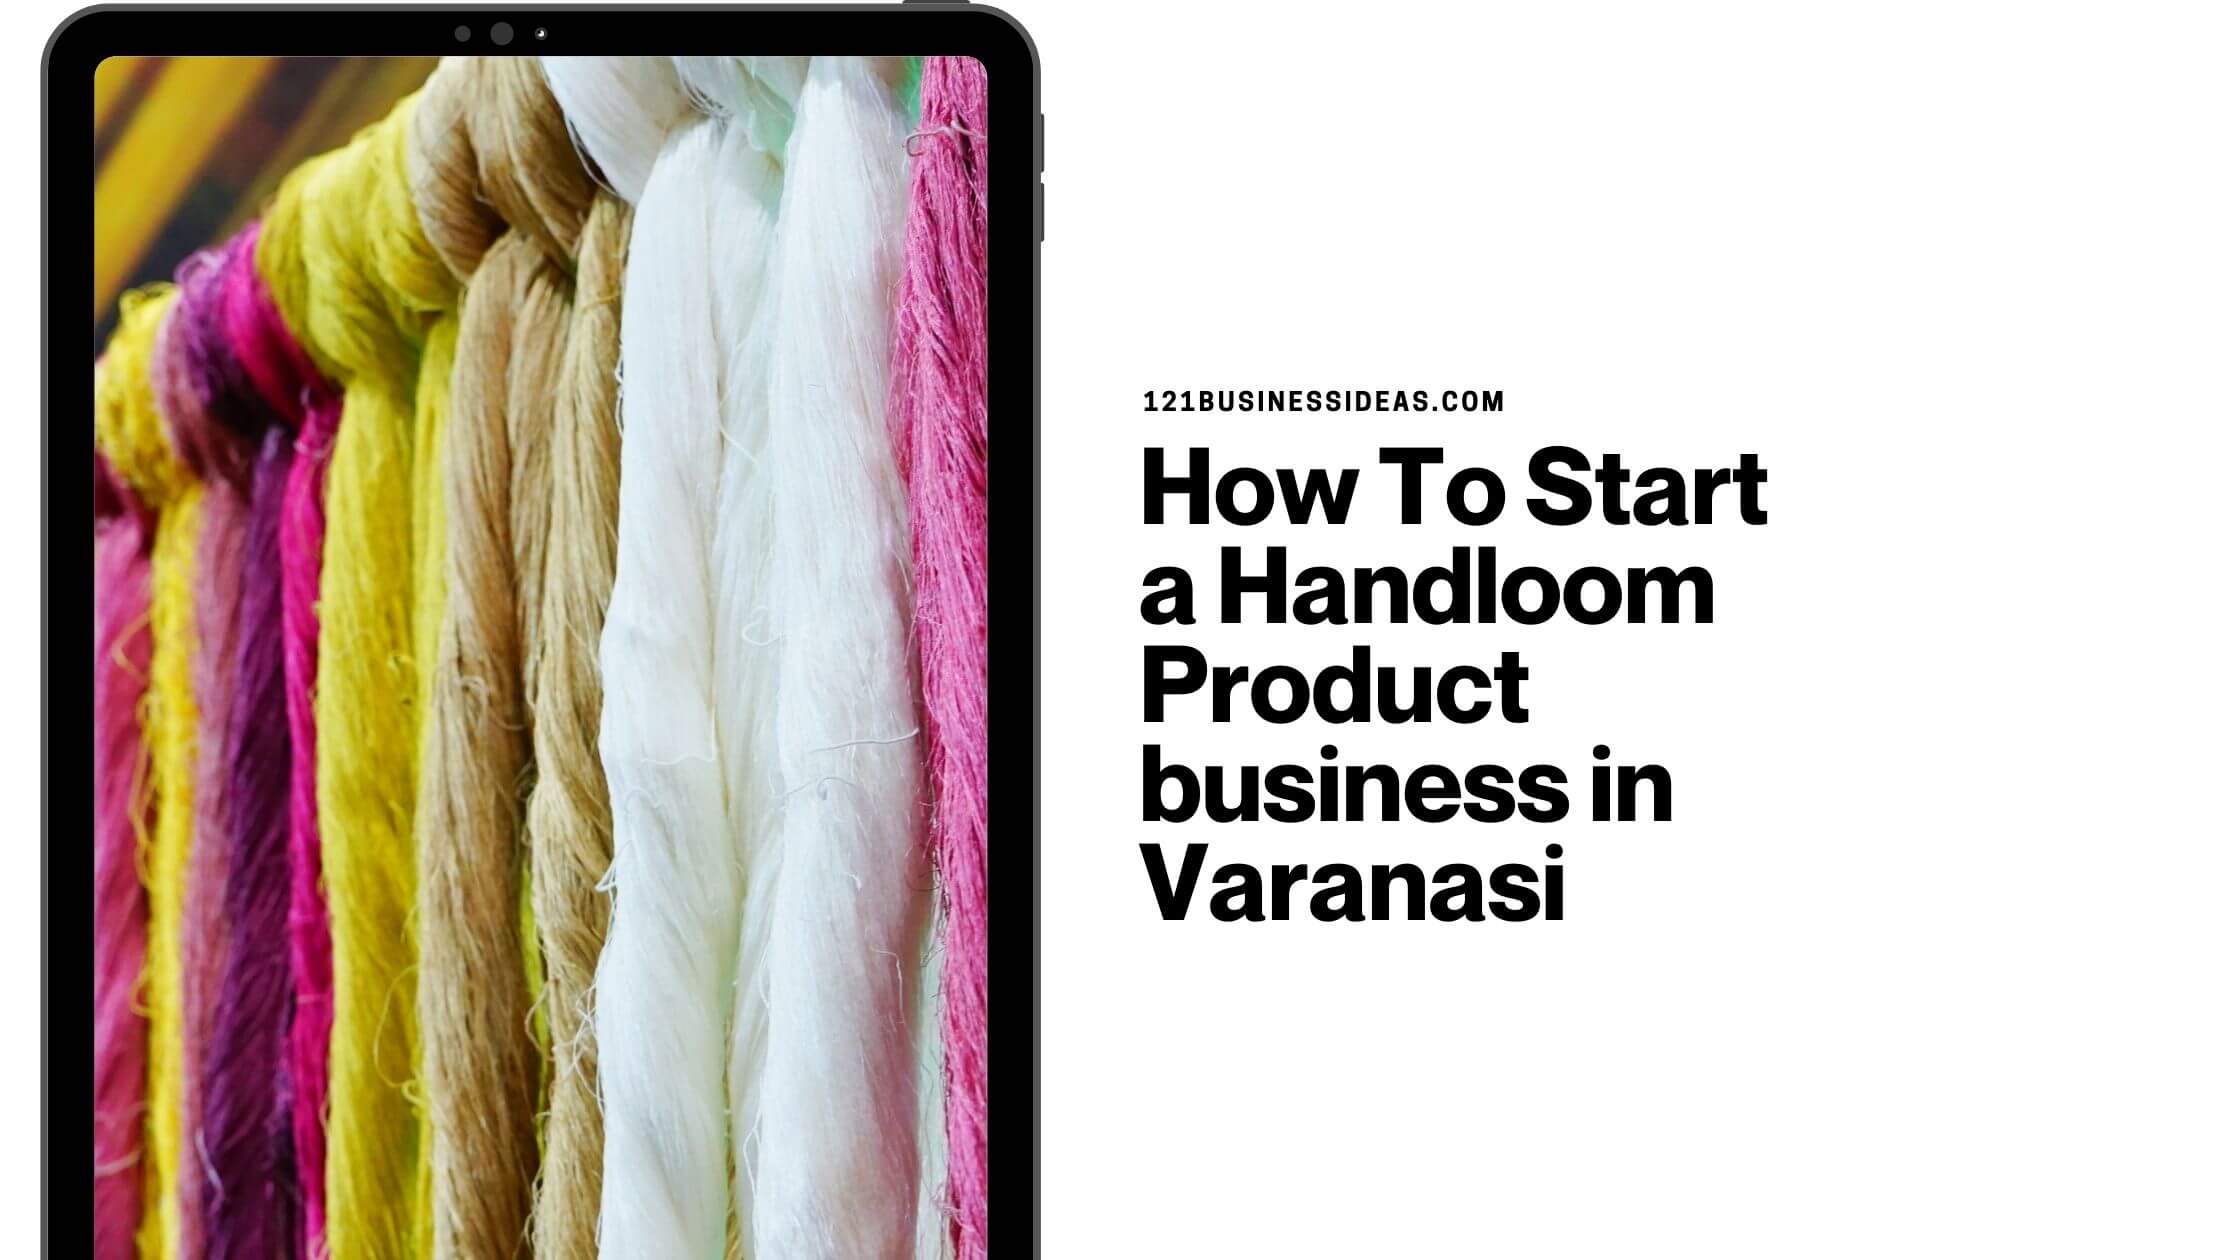 How To Start a Handloom Product business in Varanasi (1)